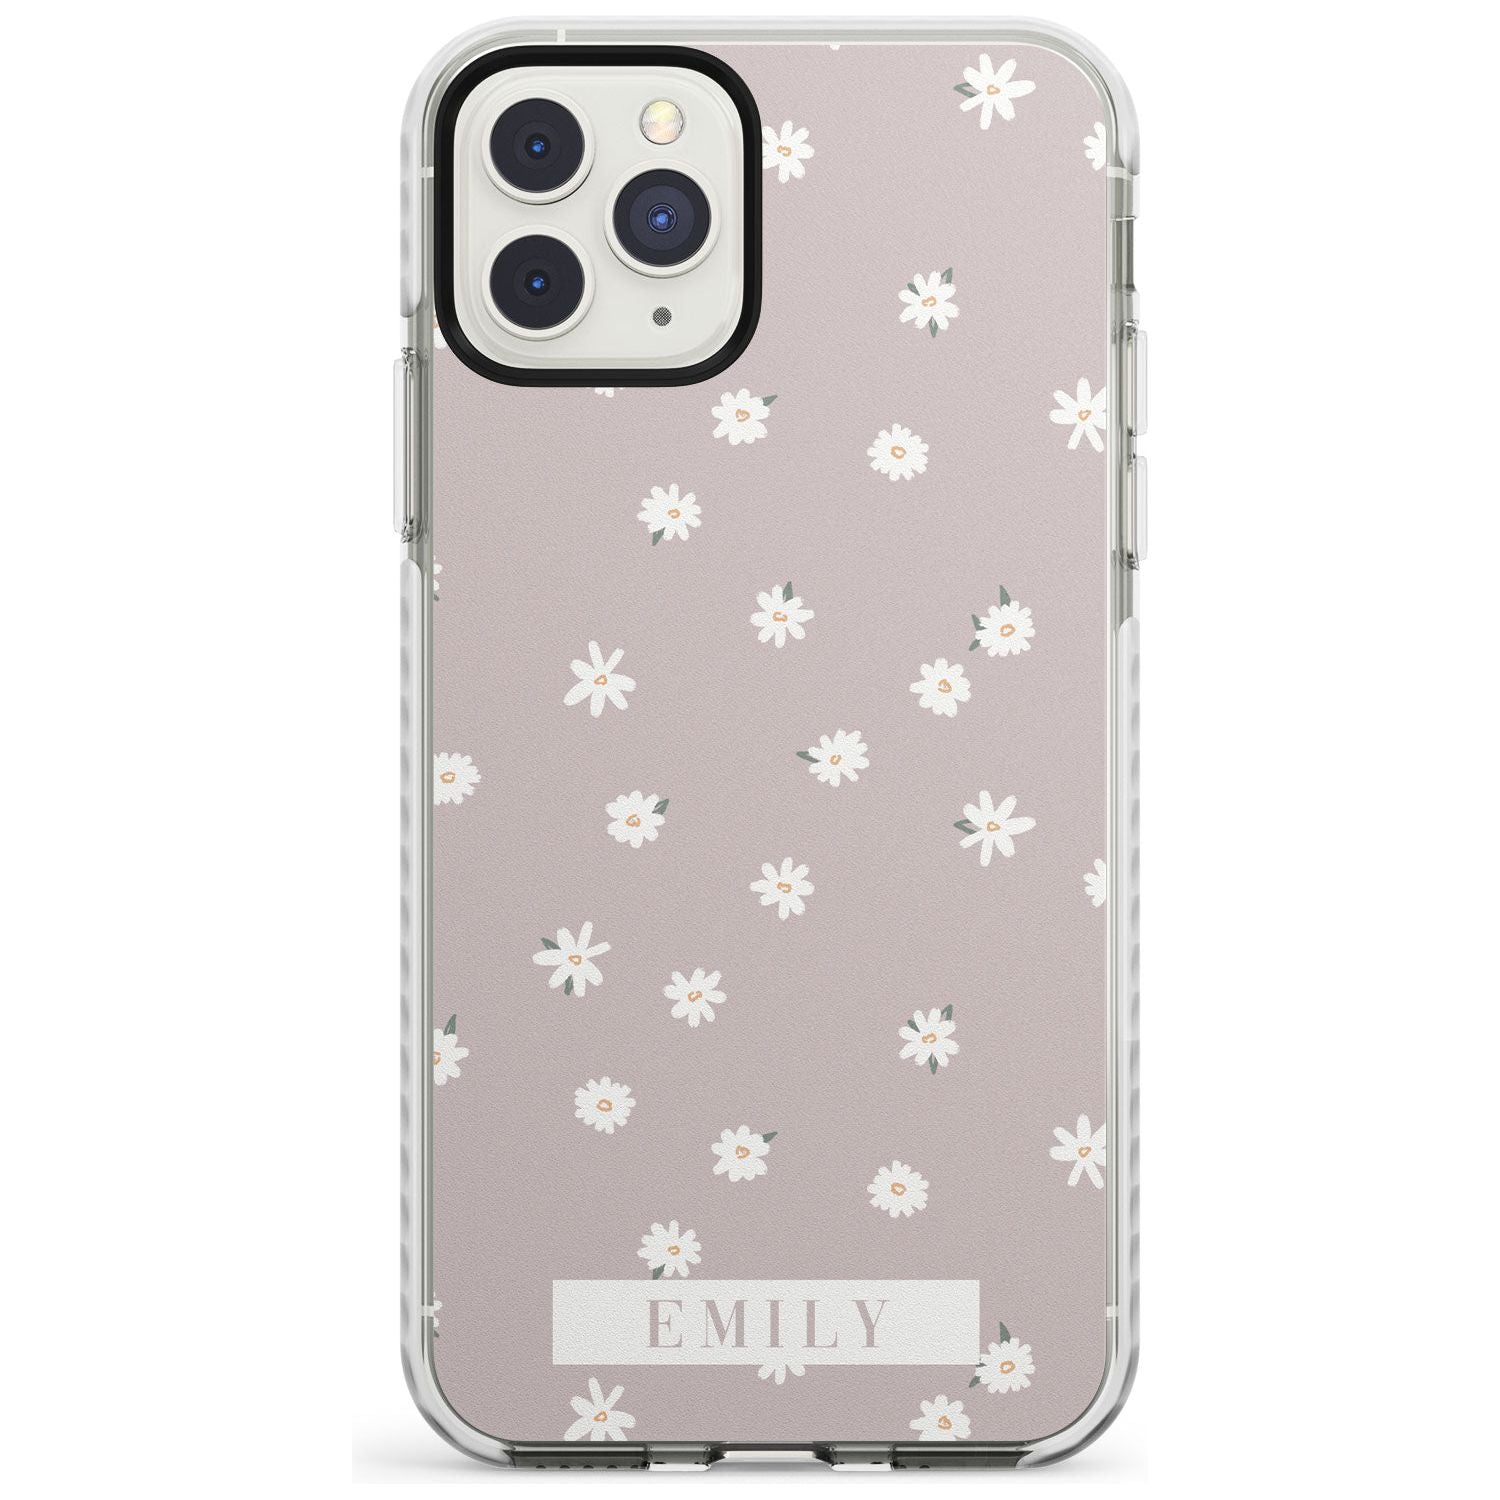 Dusty Rose Custom Impact Phone Case for iPhone 11 Pro Max